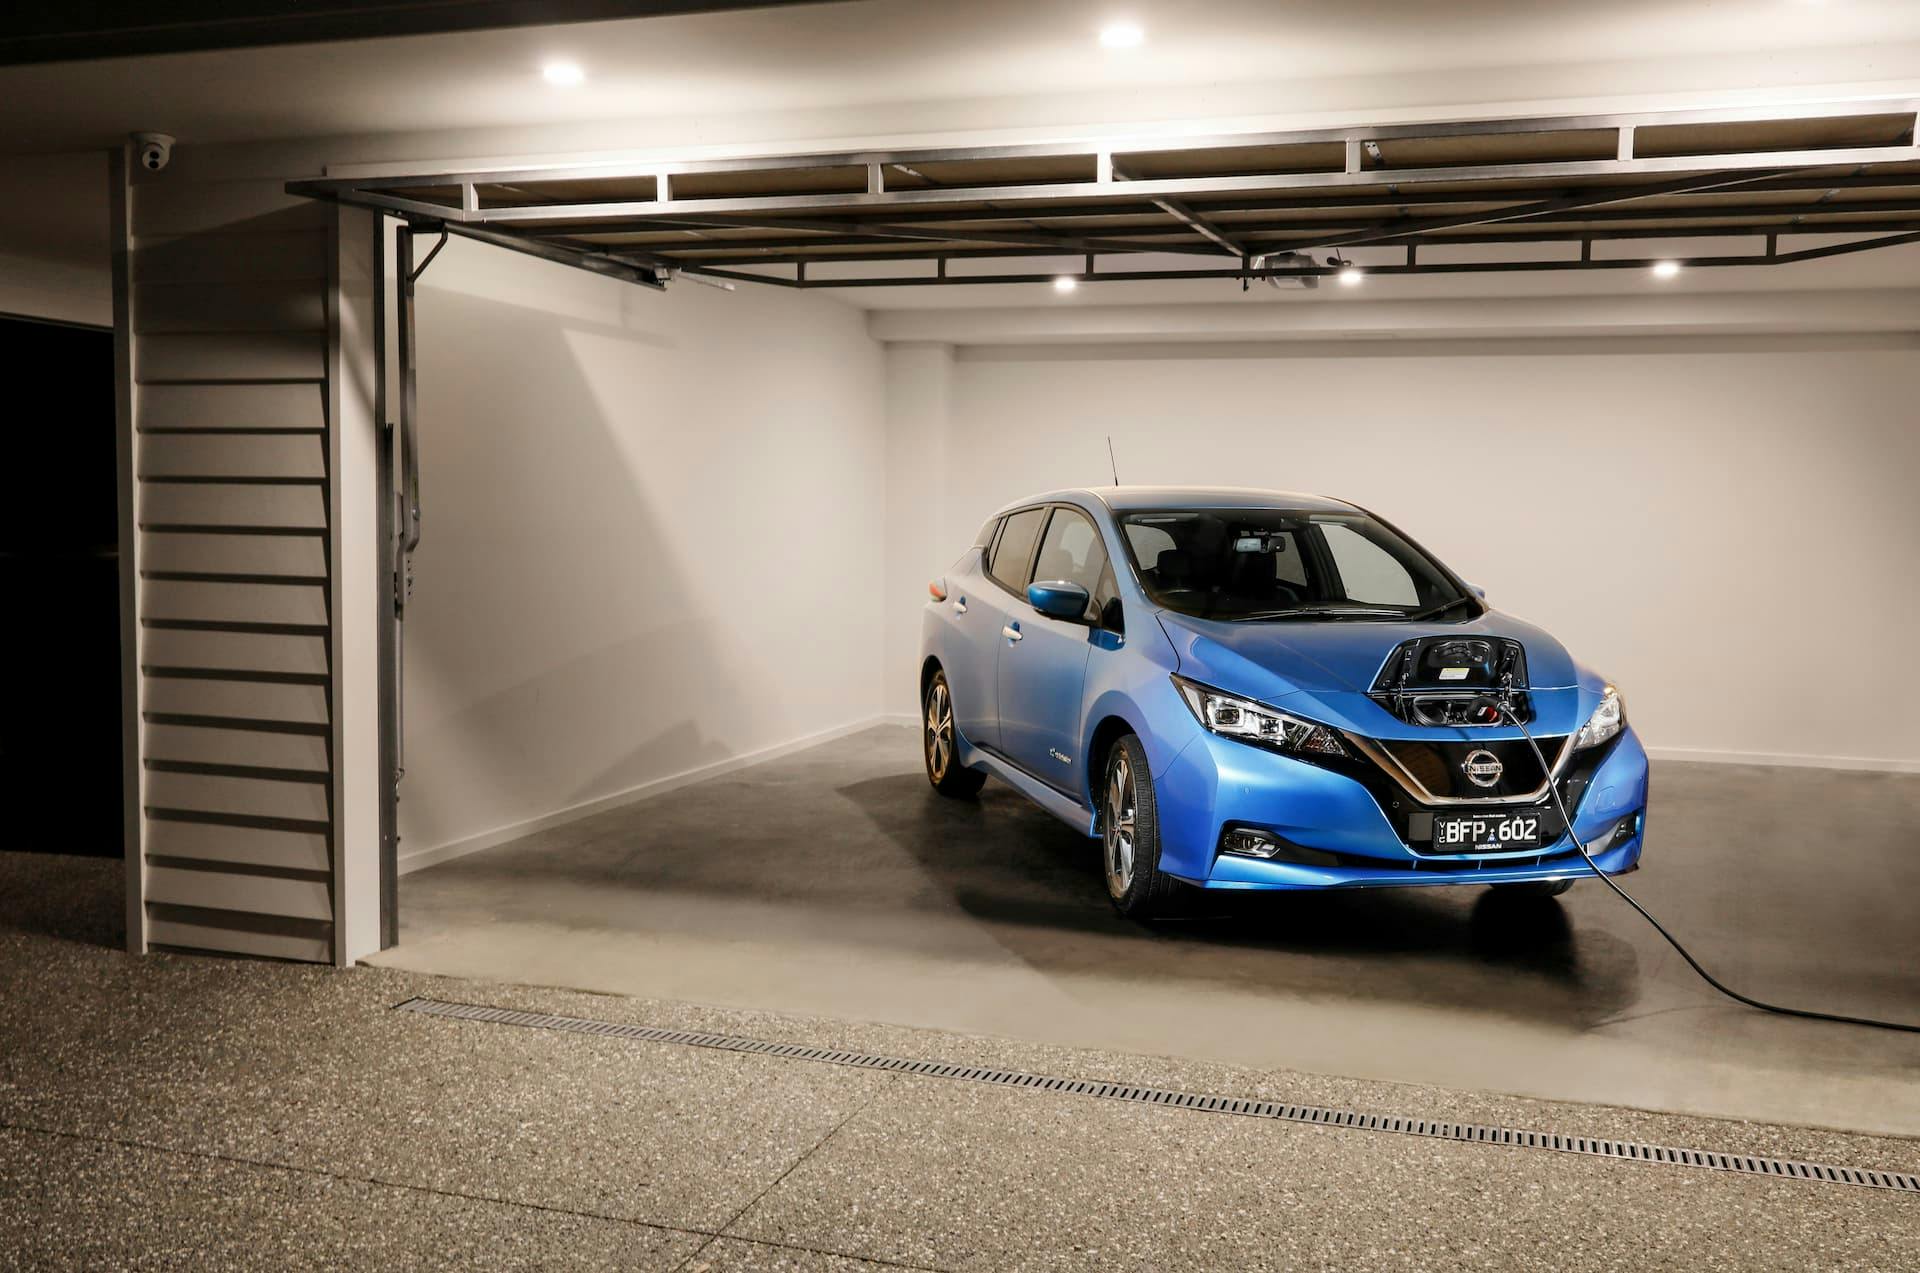 Nissan Leaf charging in home garage at night